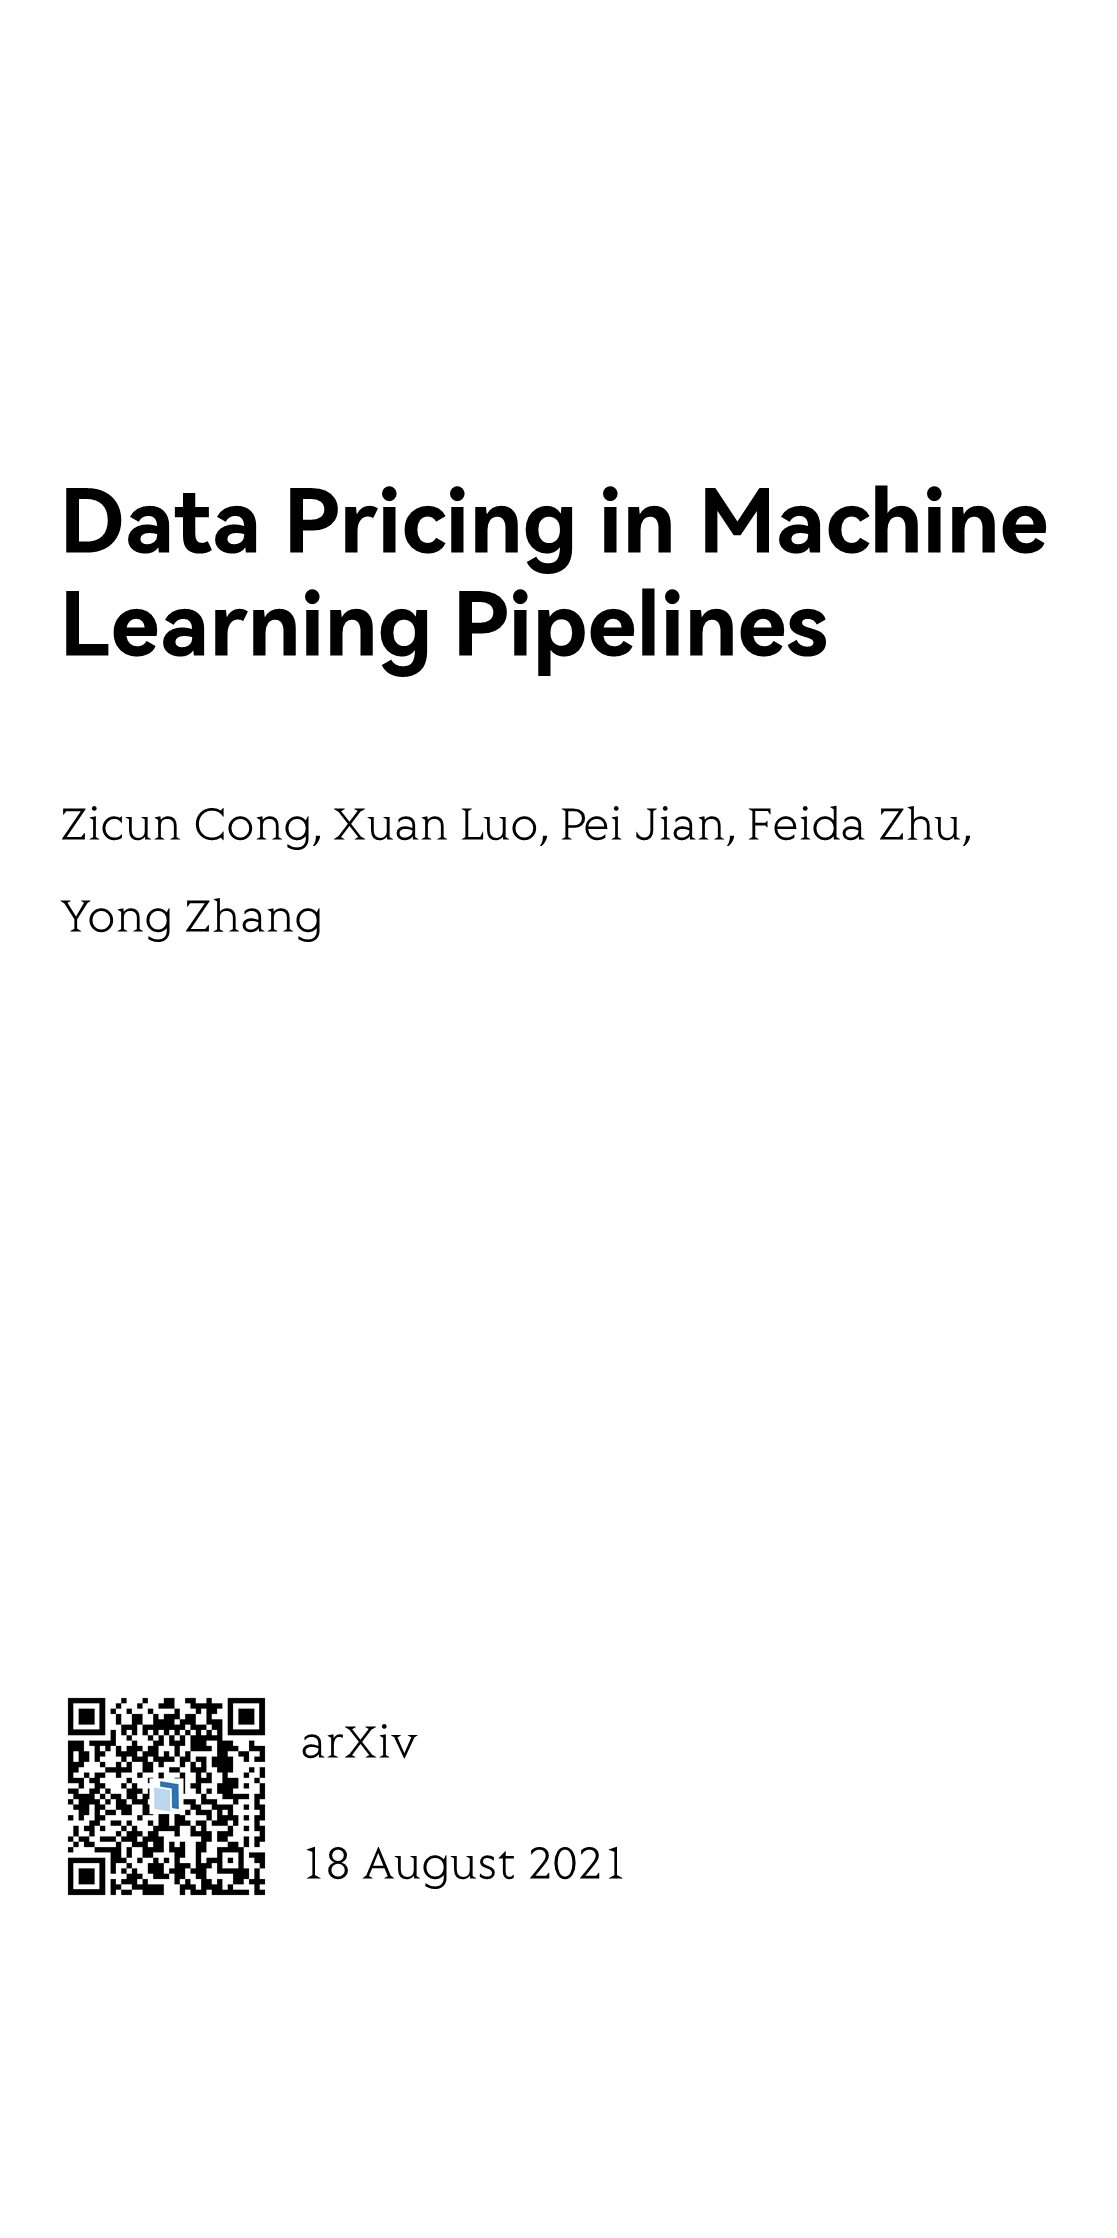 Data Pricing in Machine Learning Pipelines_1